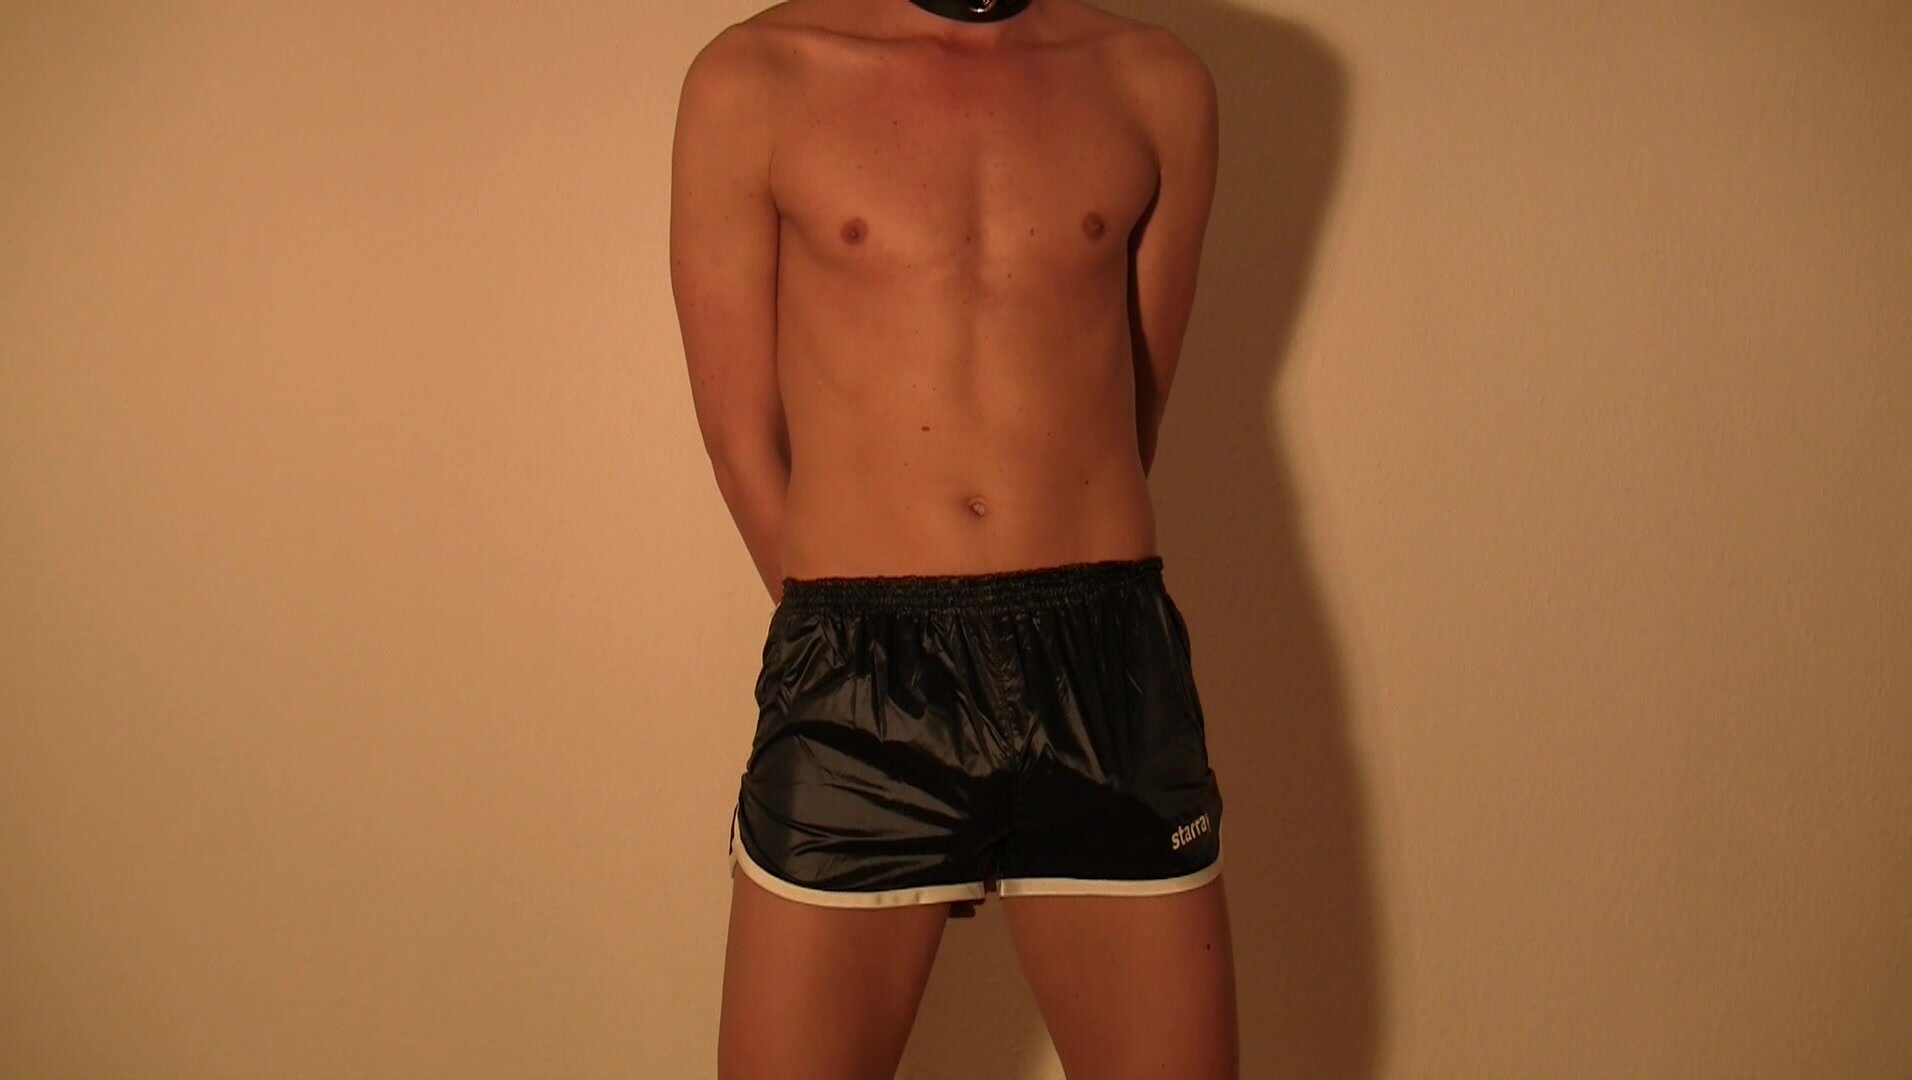 Shiny shorts handcuffs and helping hands